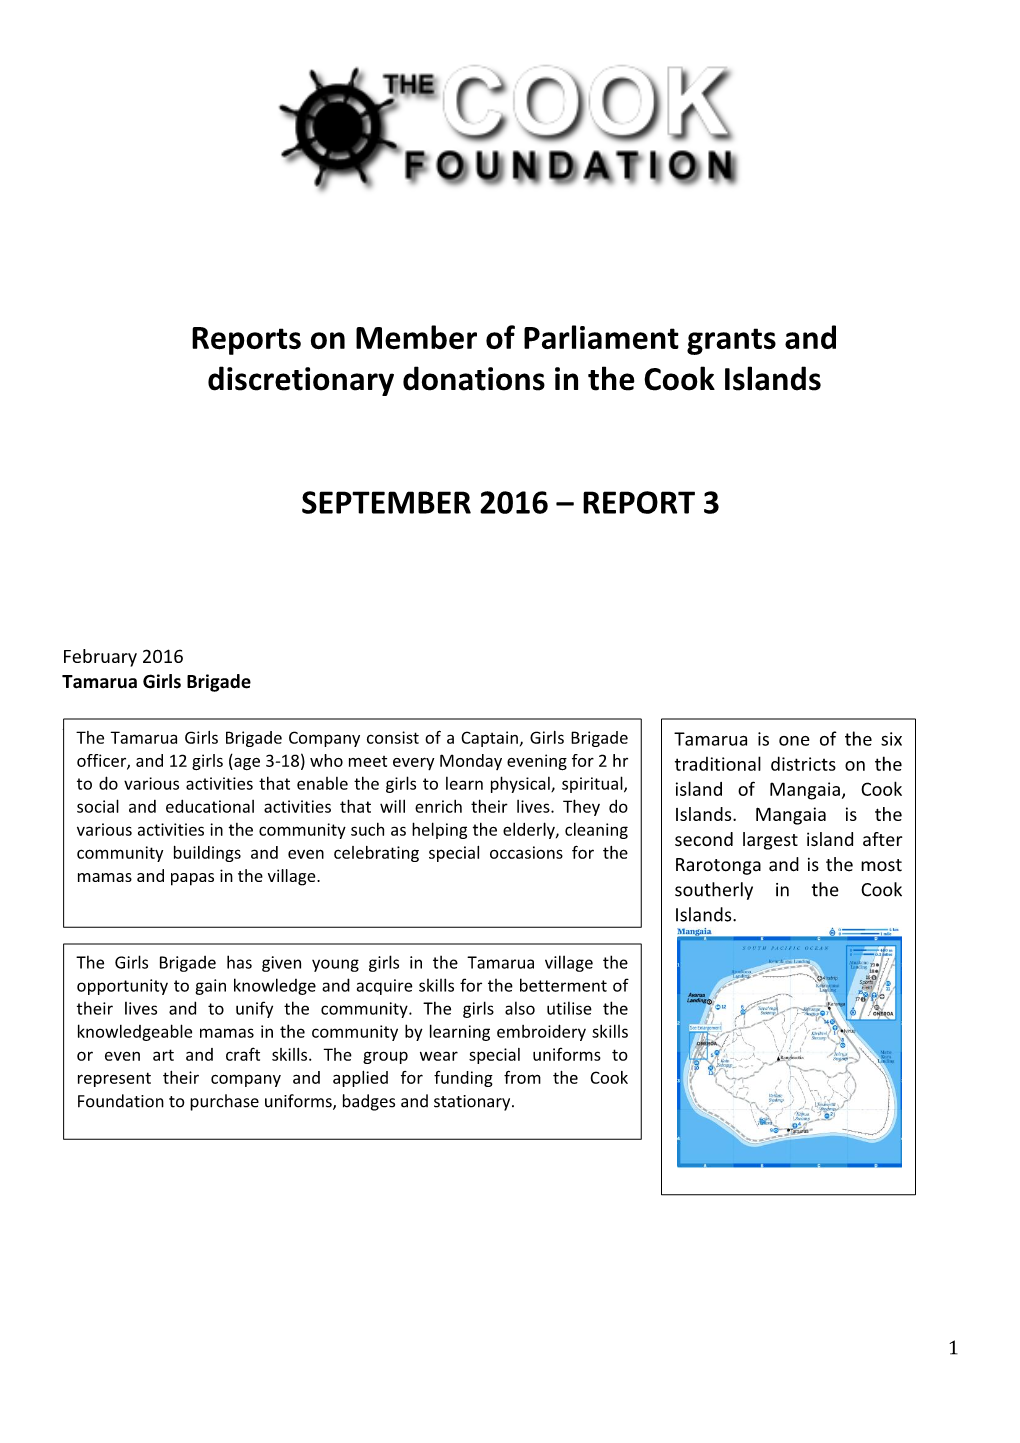 Reports on Member of Parliament Grants and Discretionary Donations in the Cook Islands SEPTEMBER 2016 – REPORT 3